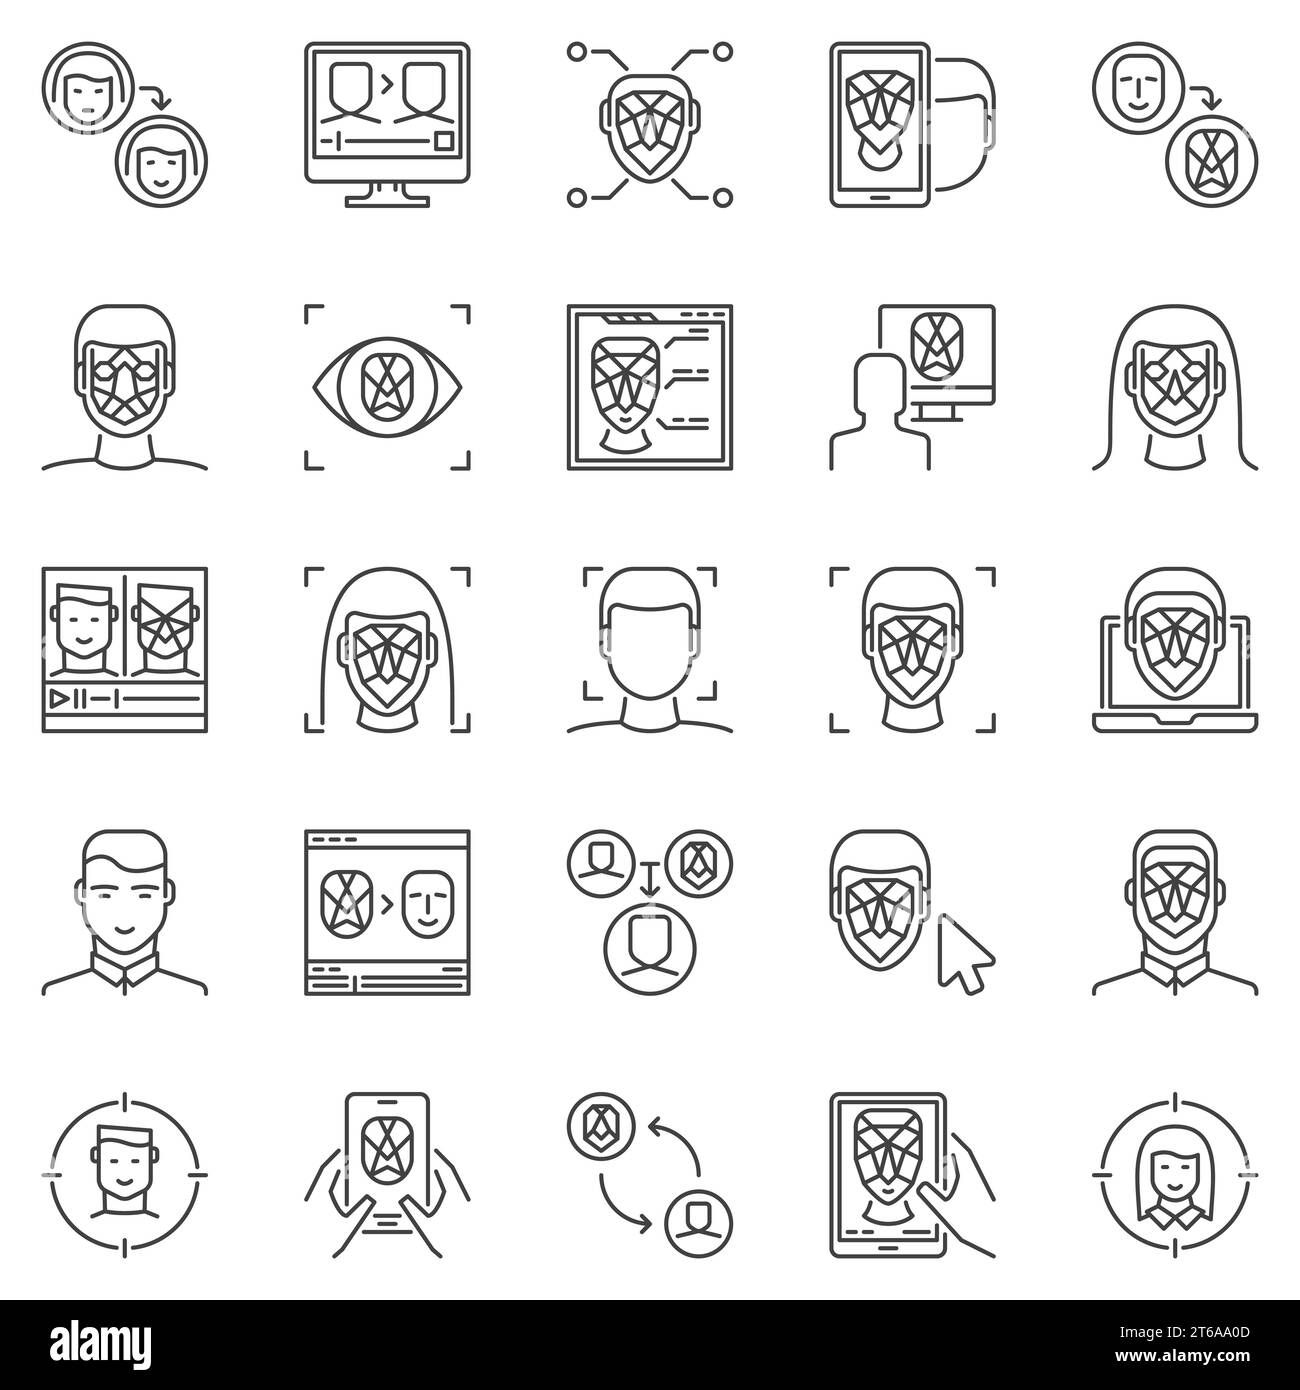 Face Recognition and Authentication outline icons set. Vector Deepfake technology concept symbols. Facial Recognition and verification linear signs Stock Vector